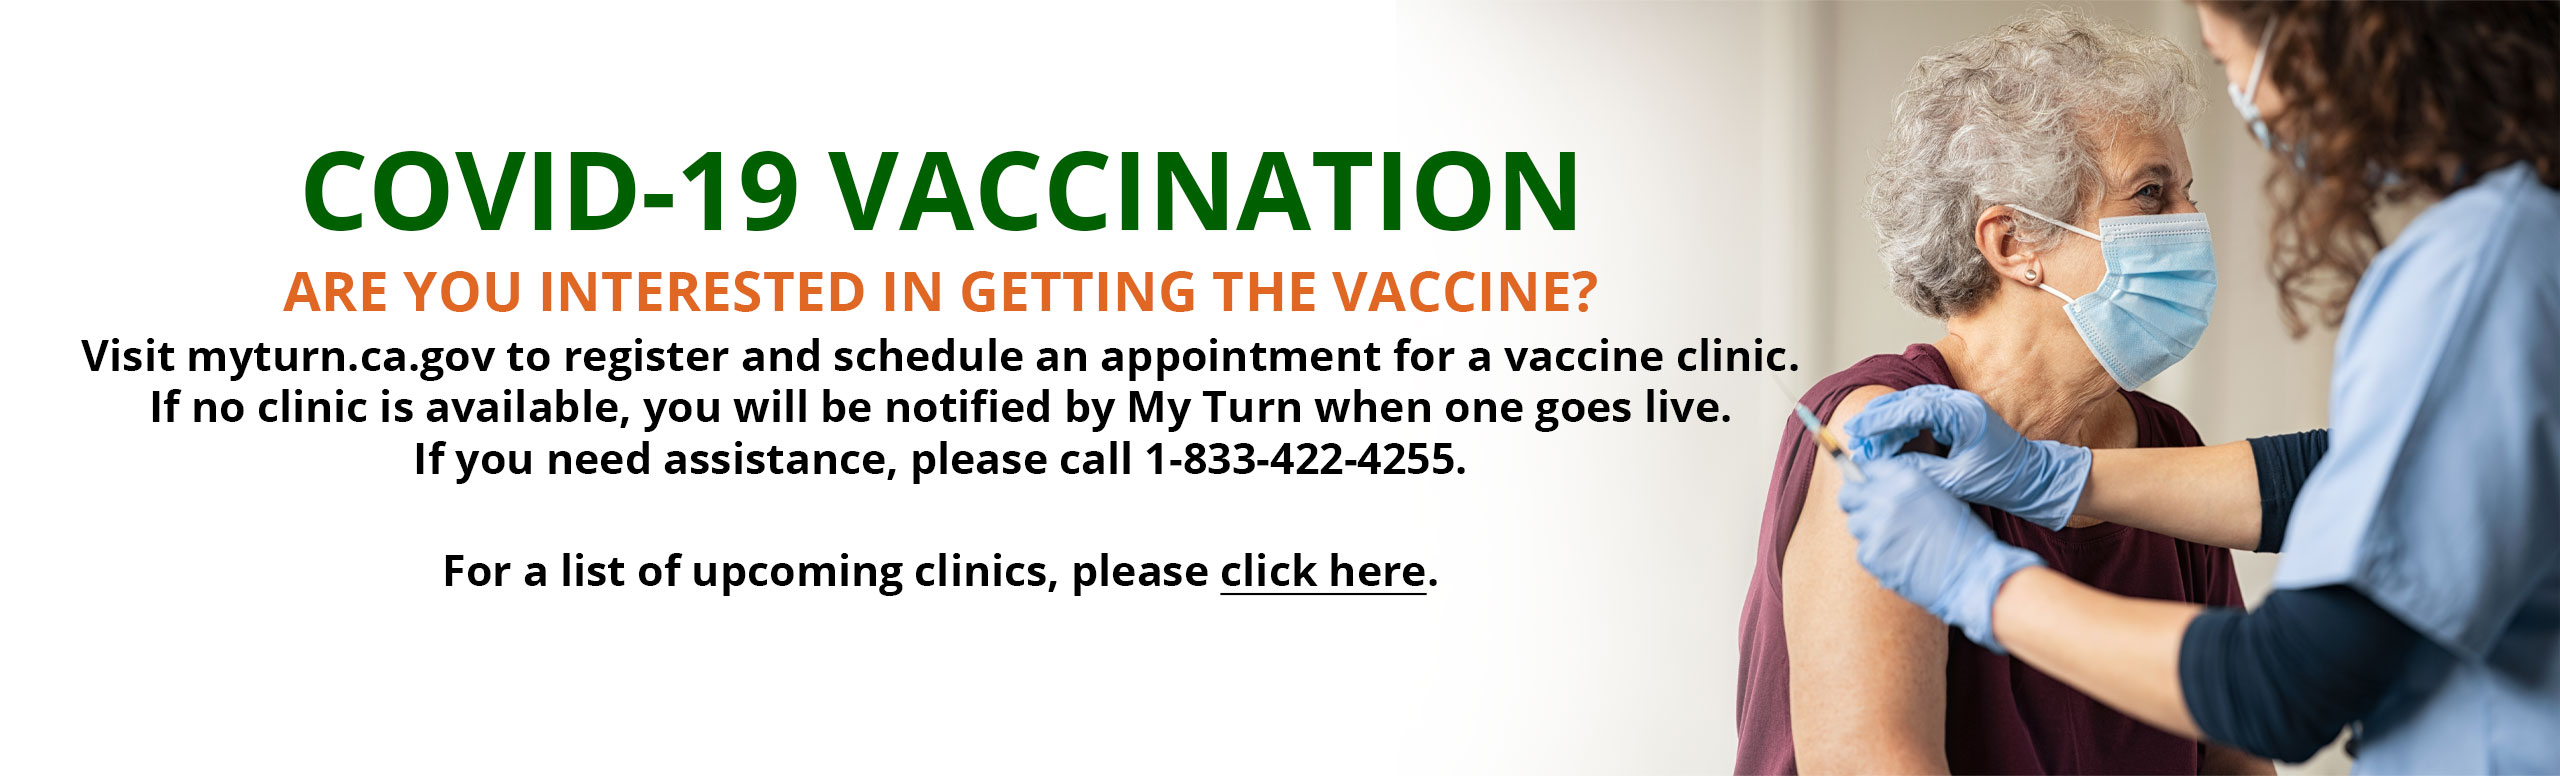 COVID-19 VACCINATION
ARE YOU INTERESTED IN GETTING THE VACCINE? 
Visit myturn.ca.gov to register and schedule an appointment for a vaccine clinic. If no clinic is available, you will be notified by My Turn when one goes live. If you need assistance, please call 1-833-422-4255. 

For a list of upcoming clinics, please click here.